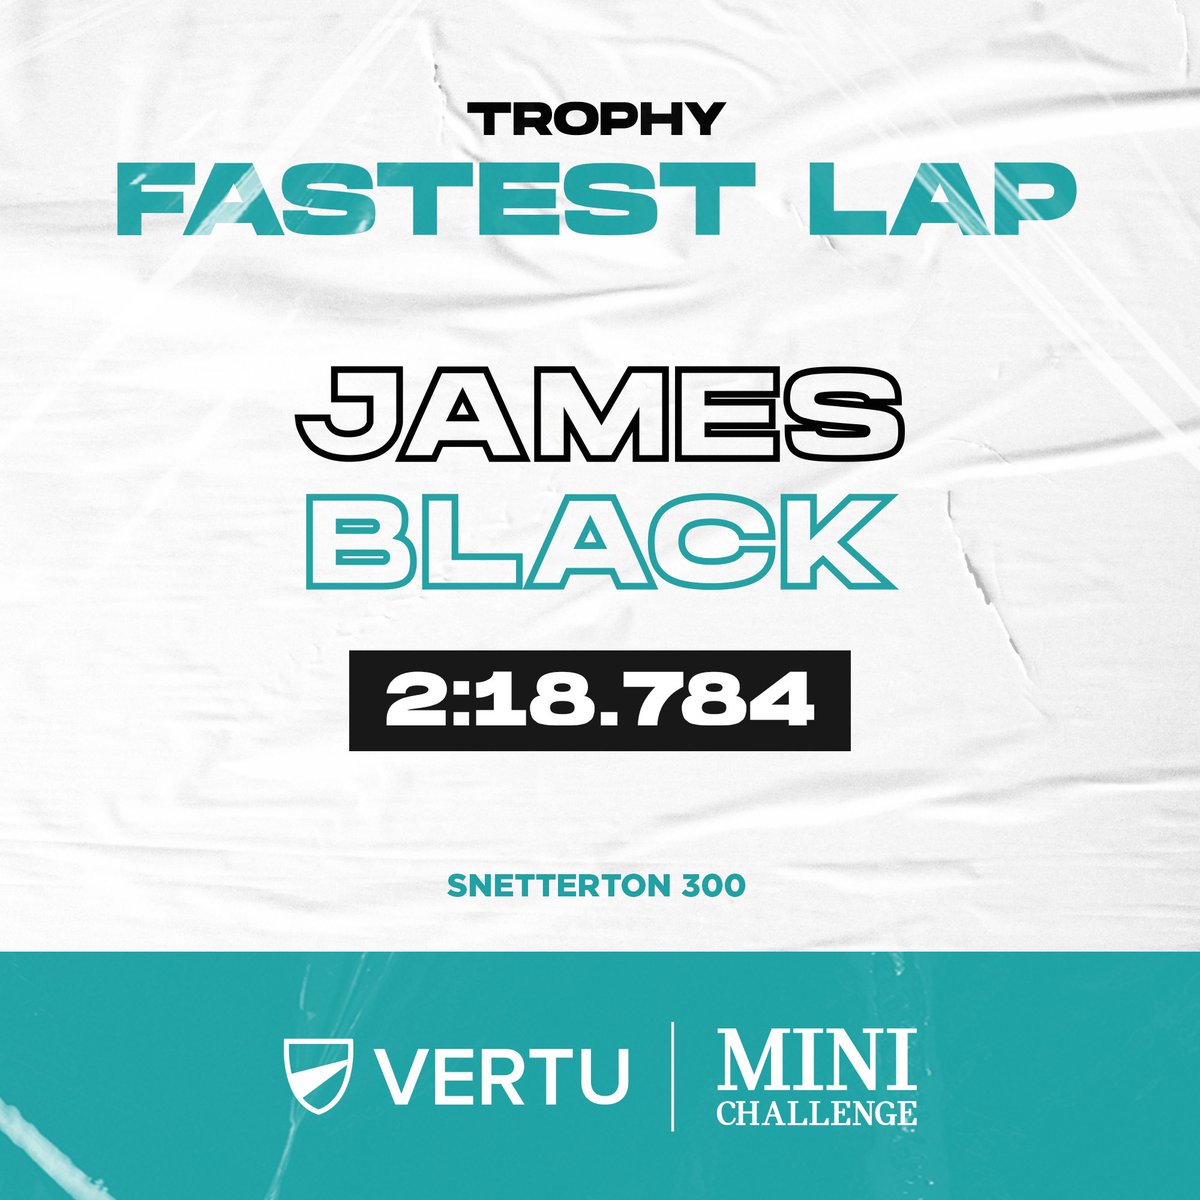 FASTEST LAP: James Black secures the fastest lap in Race 2 at Snetterton and breaks the lap record! #VertuMINICHALLENGE #FatsestLap #NewRecord